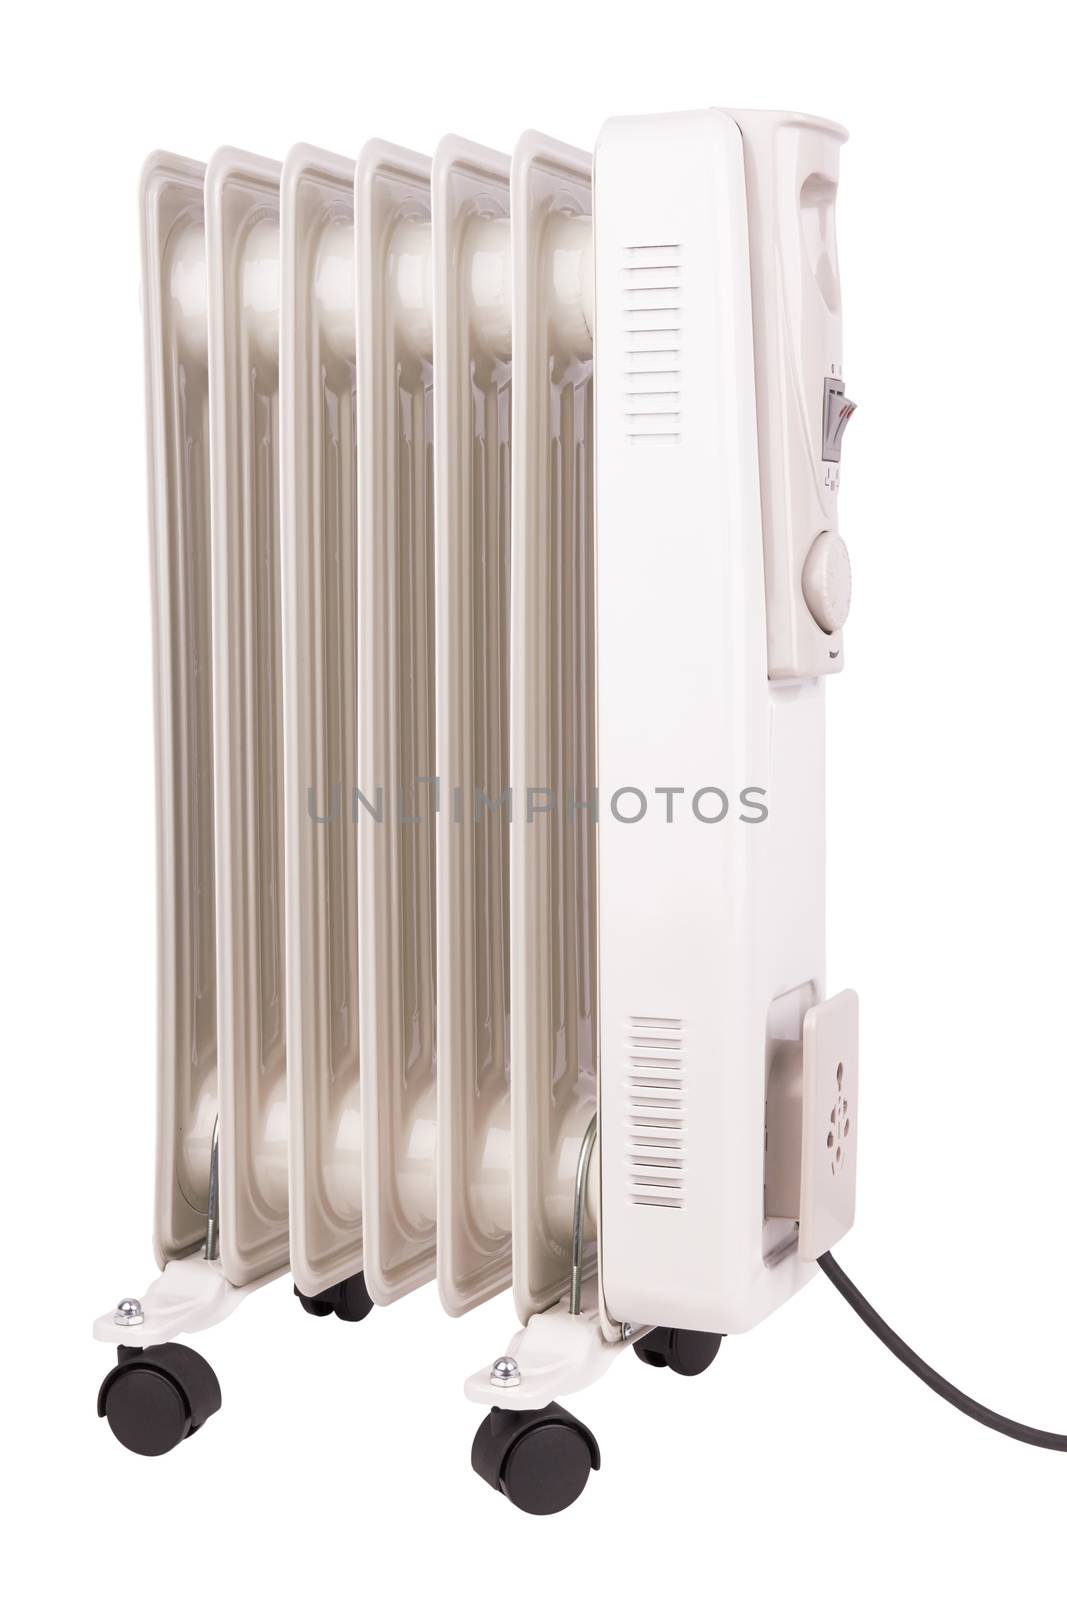 Oil electric radiator by pioneer111